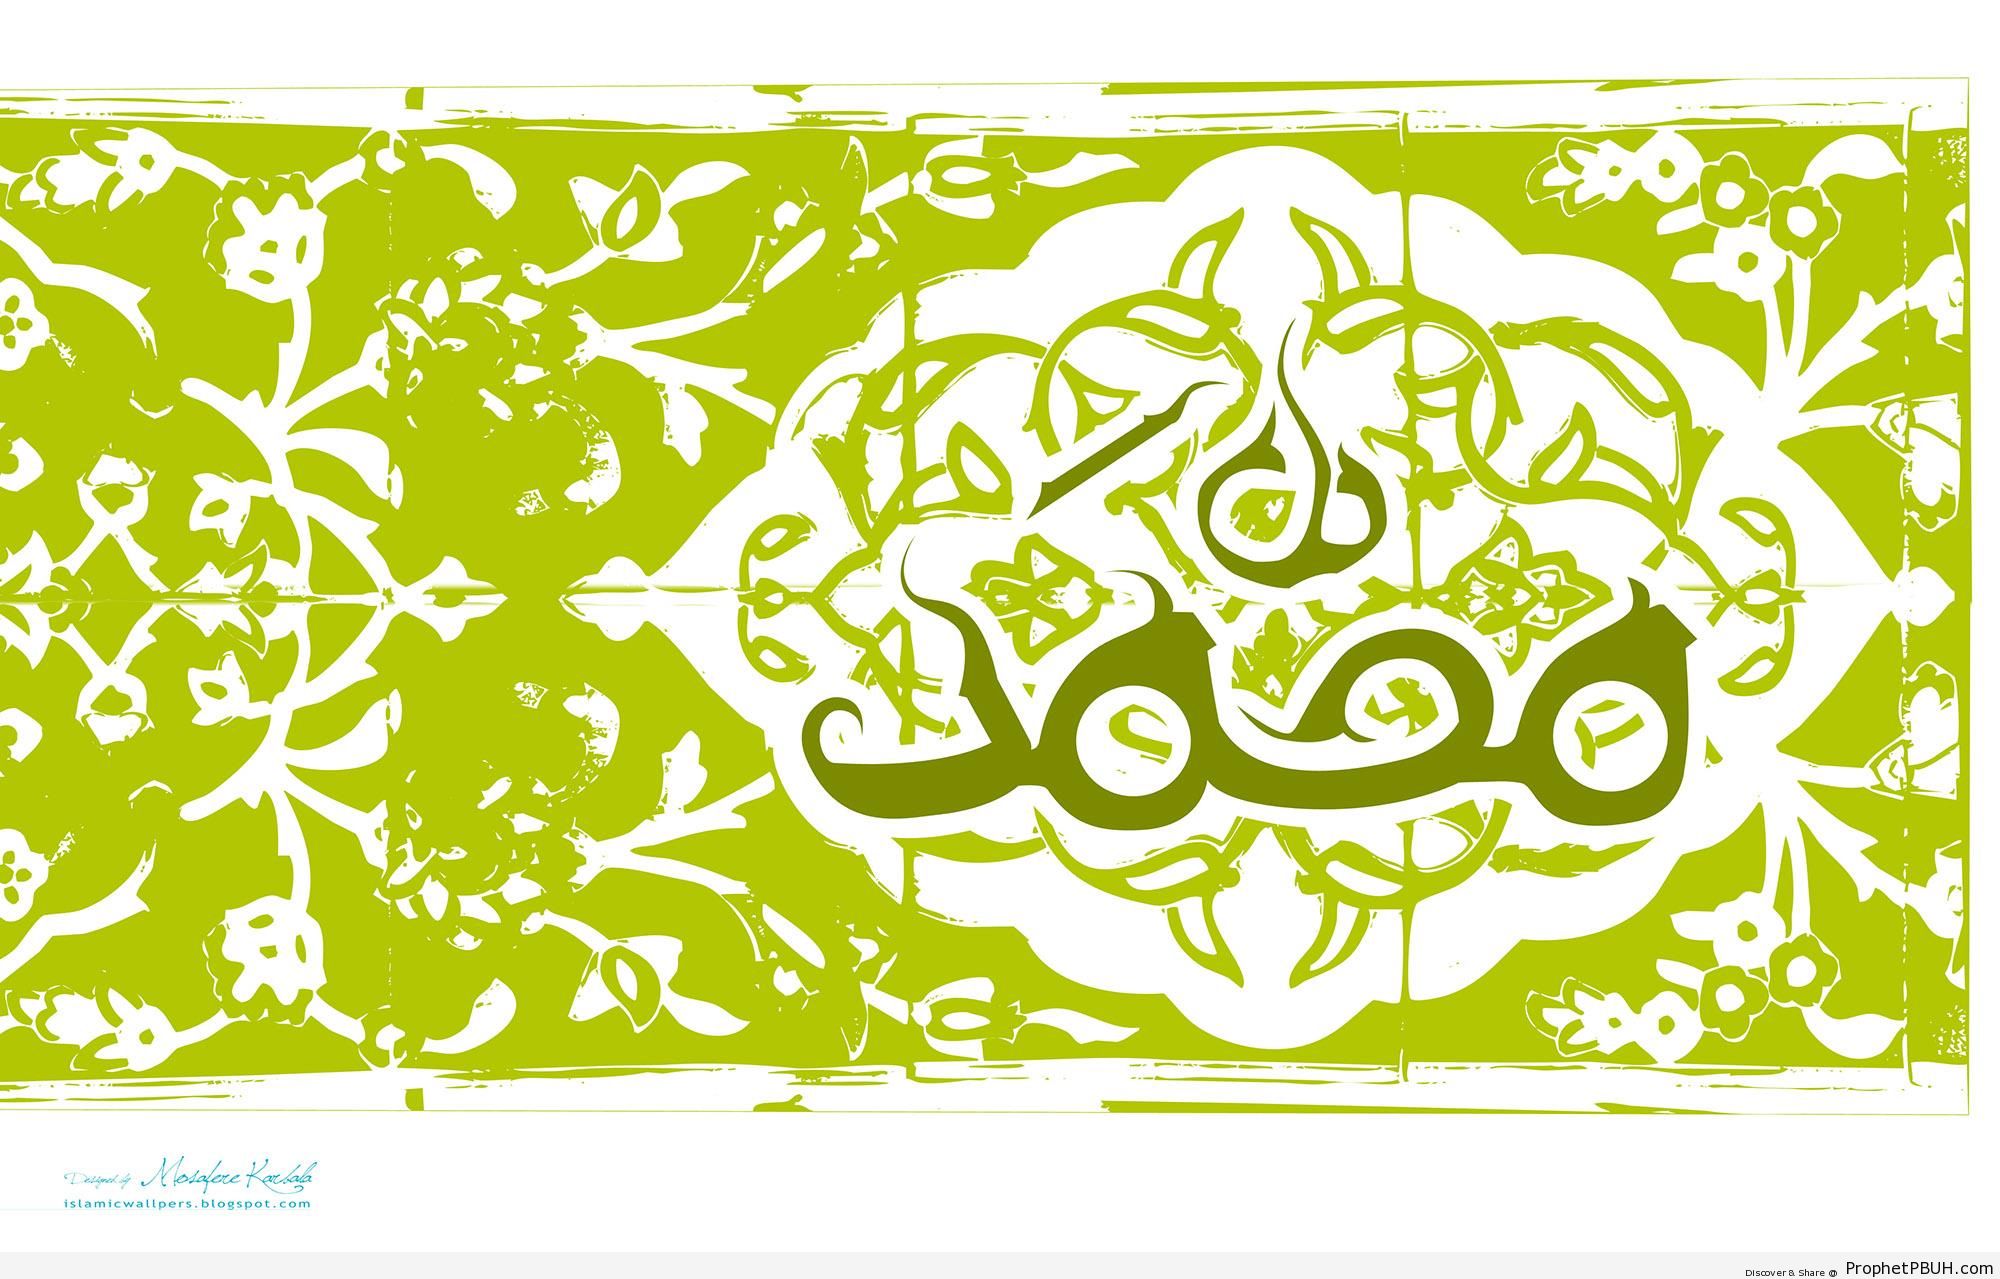 Calligraphy of the name of Prophet Muhammad ï·º - Islamic Calligraphy and Typography 